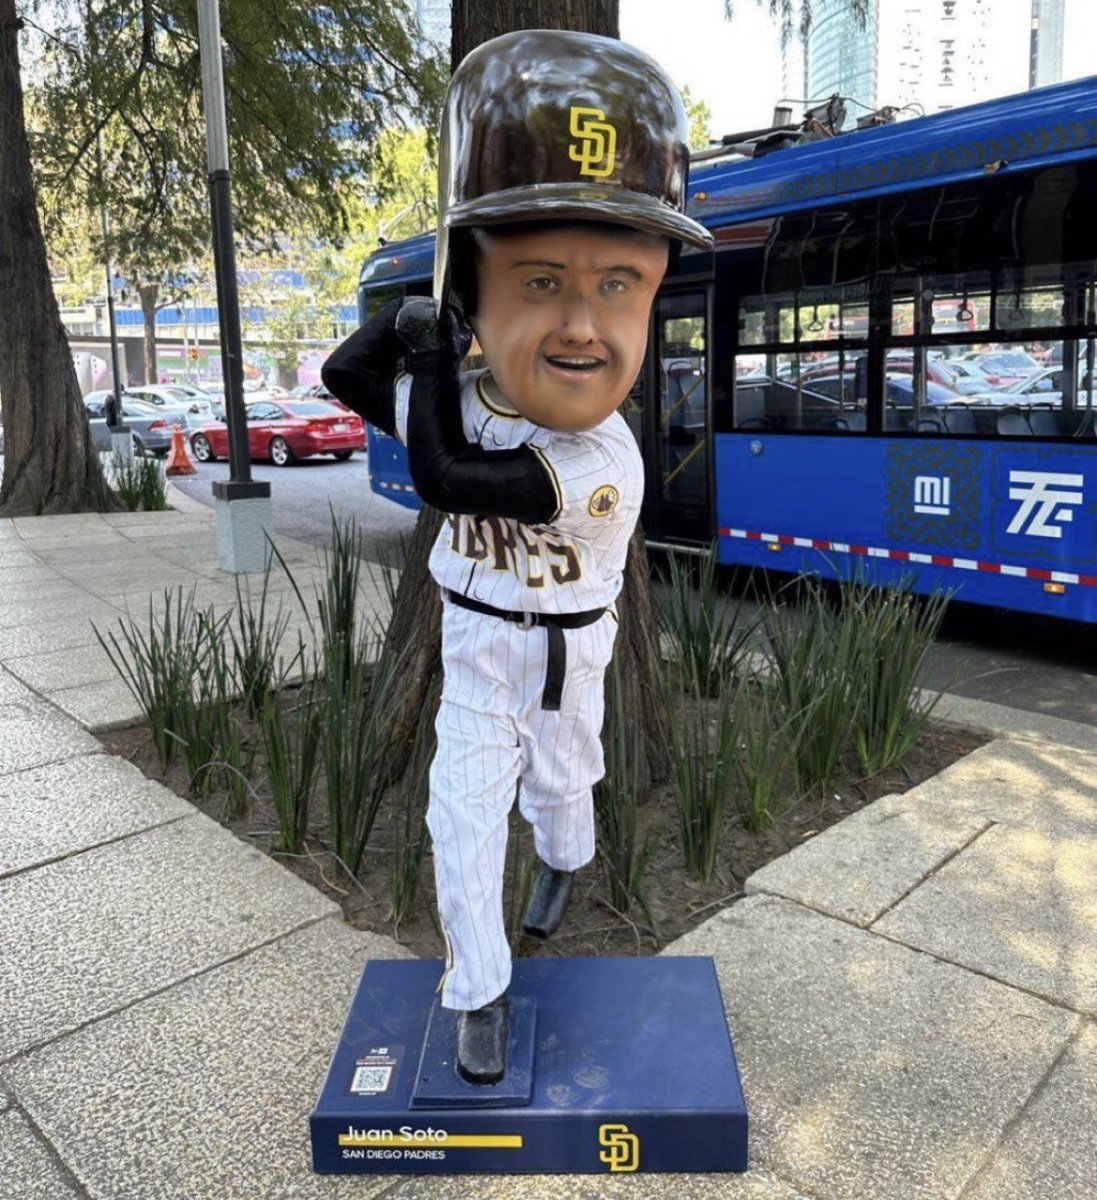 Padres Fans Roast Controversial Juan Soto Statue - Sports Illustrated  Inside The Padres News, Analysis and More